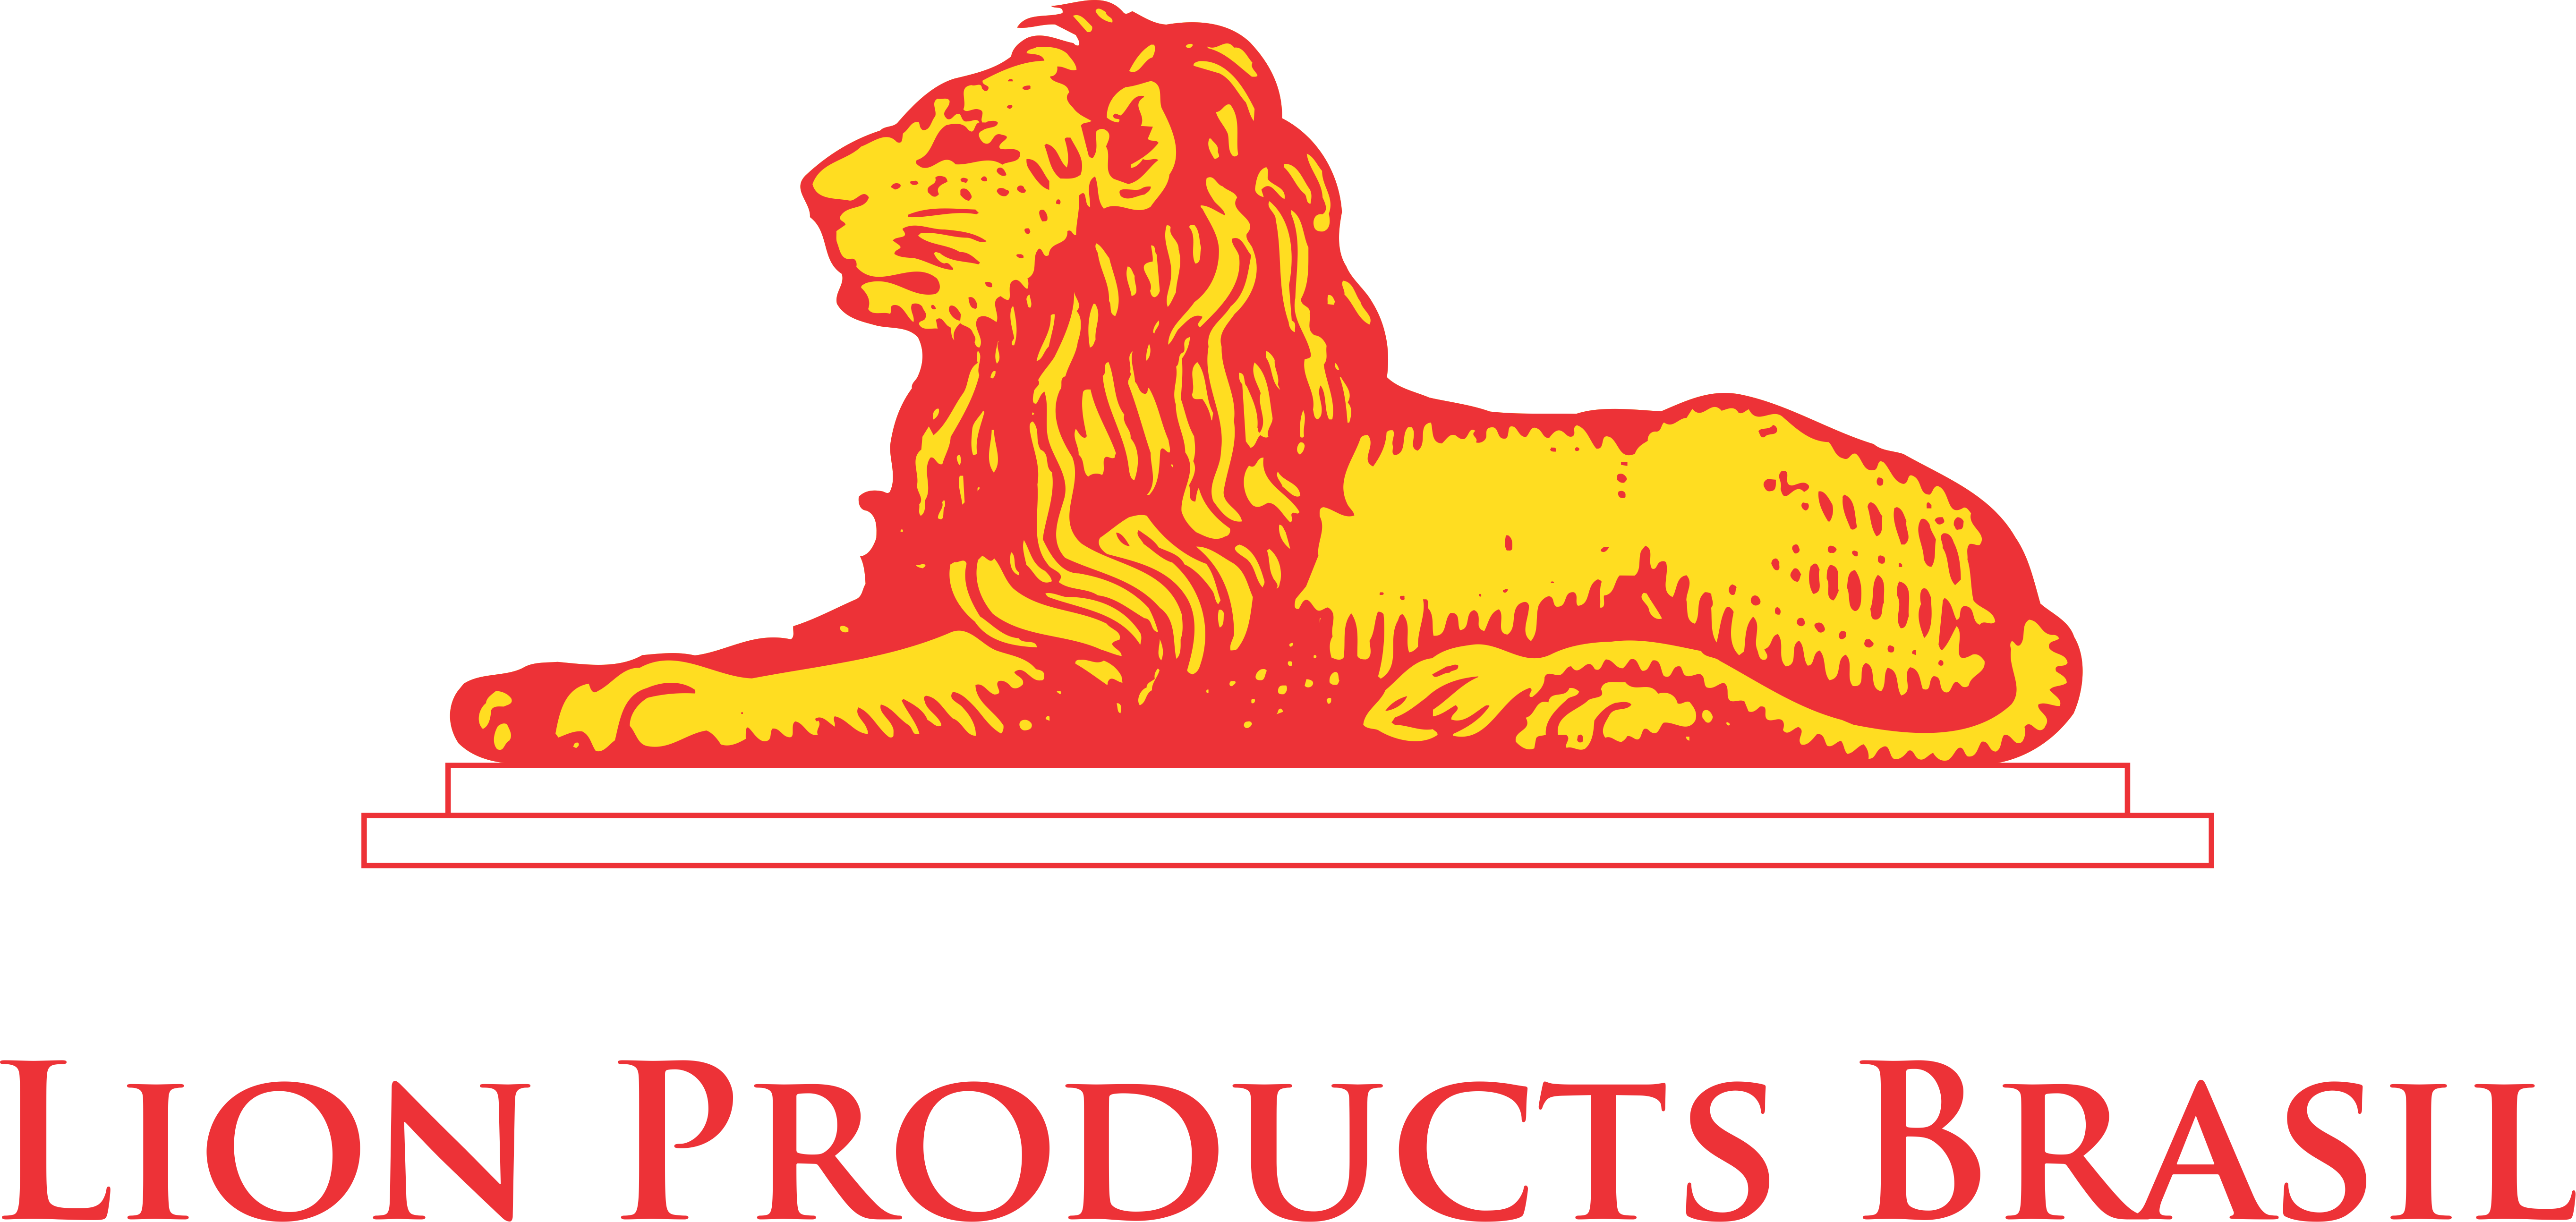 LION PRODUCTS BRASIL